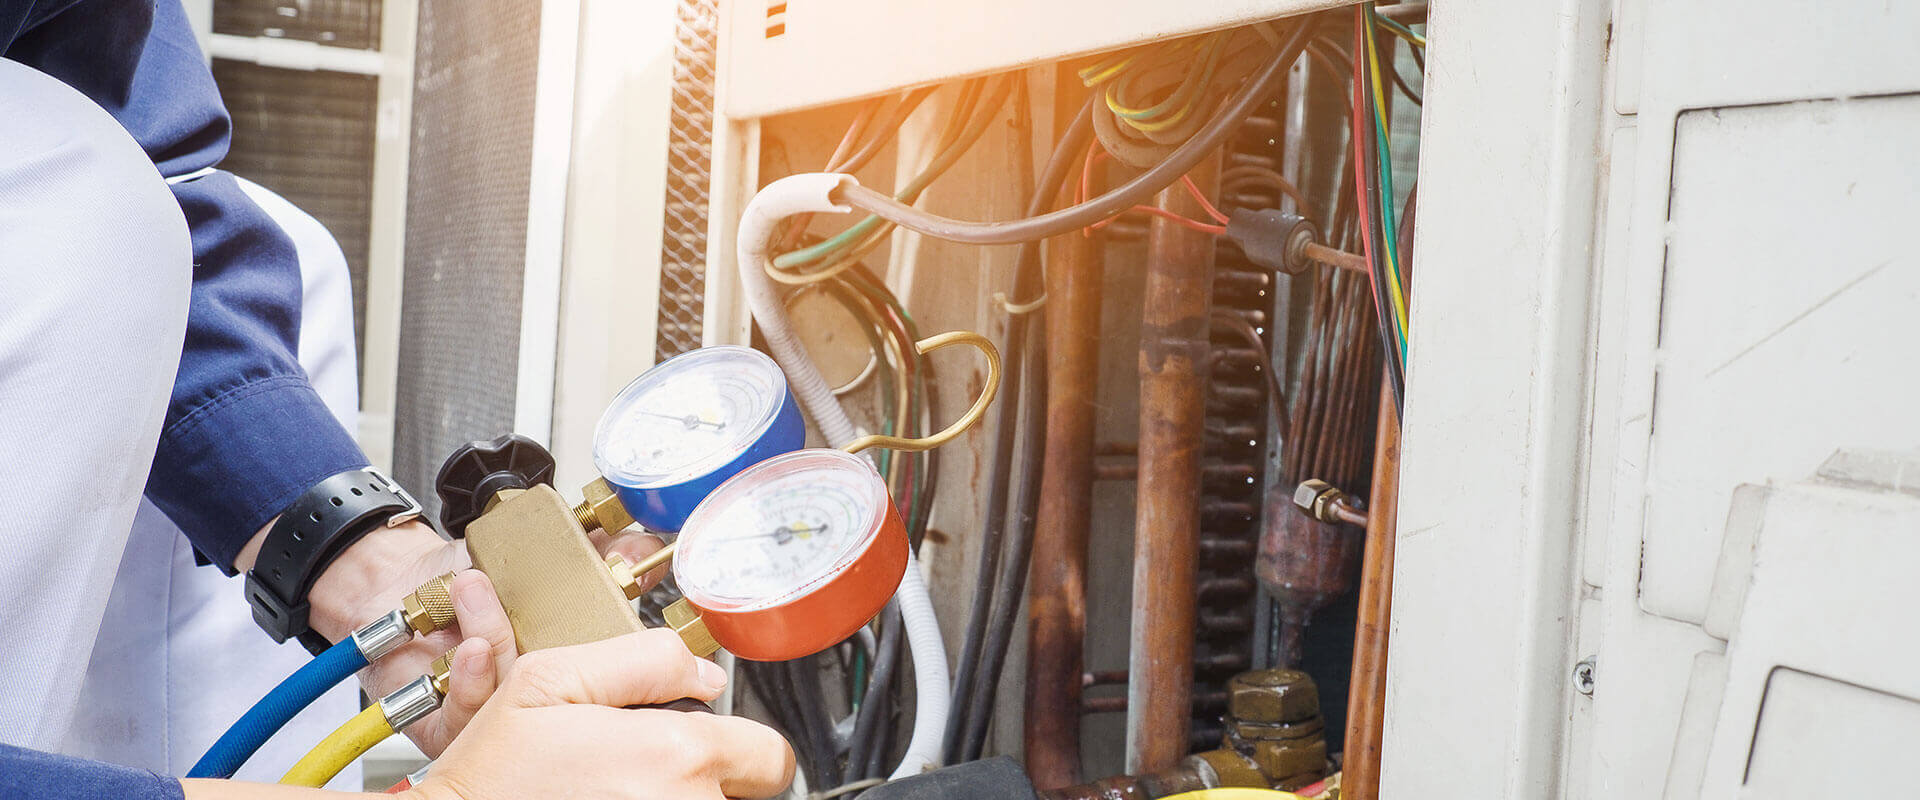 Heating Services In Rockwall, Wylie, Garland, Dallas, TX, And Surrounding Areas